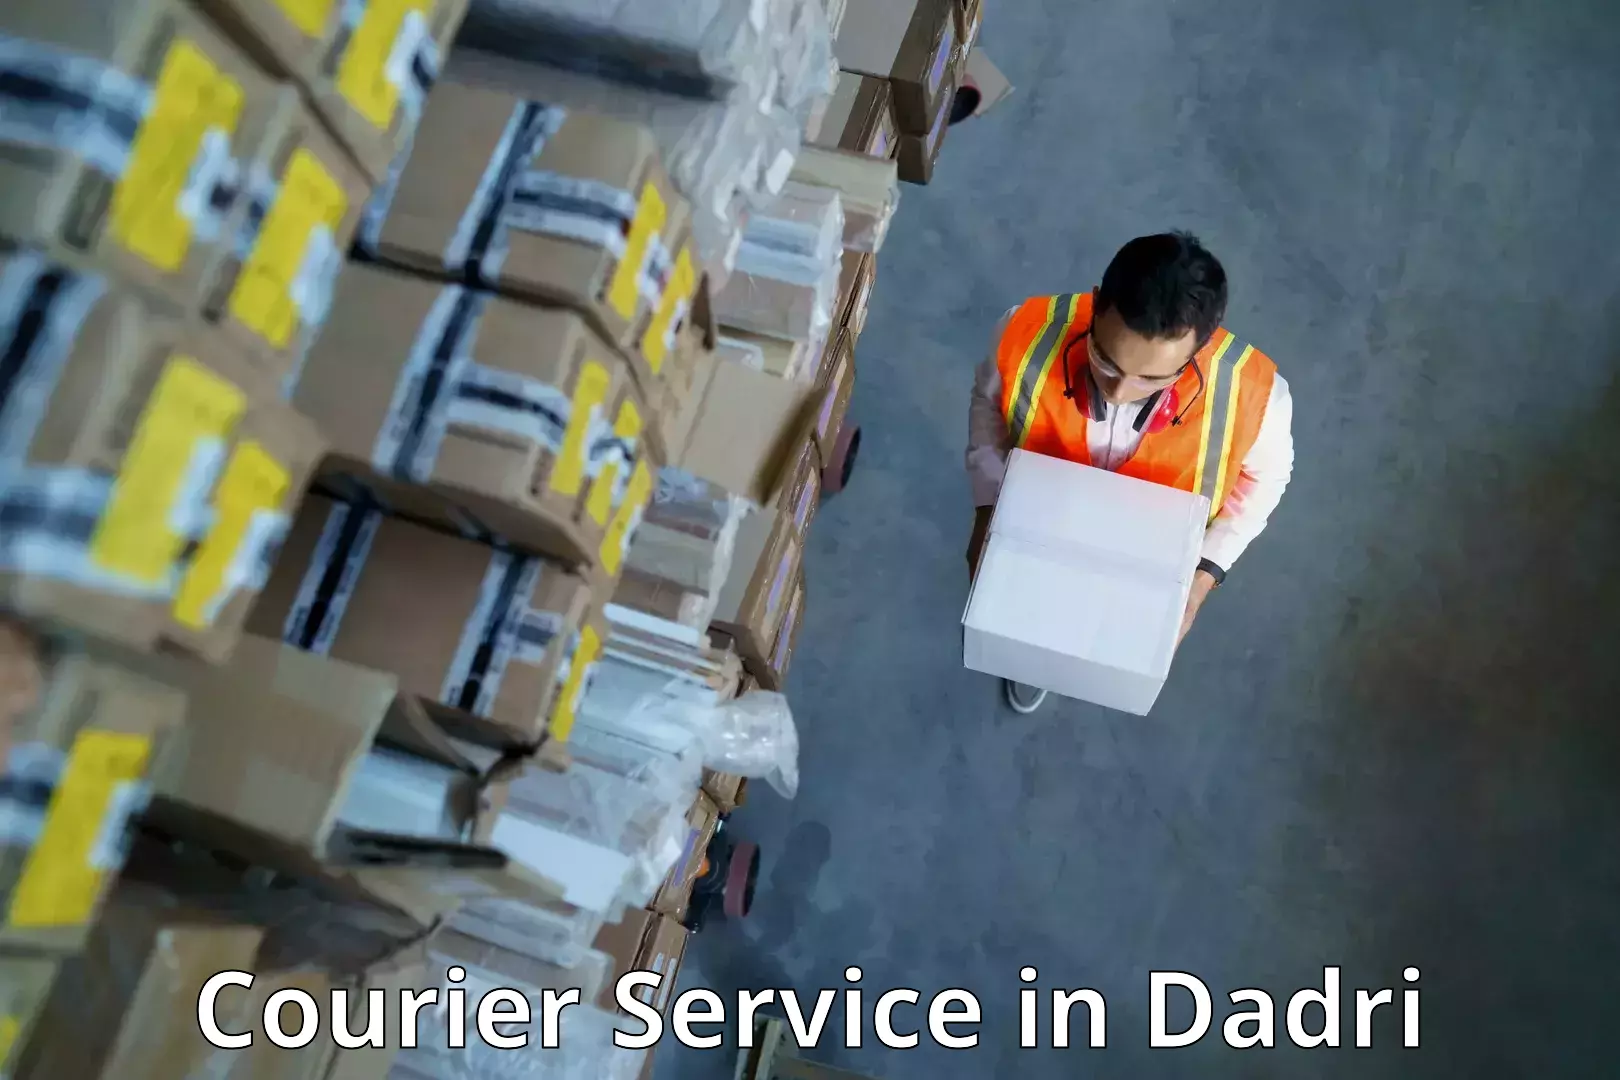 State-of-the-art courier technology in Dadri